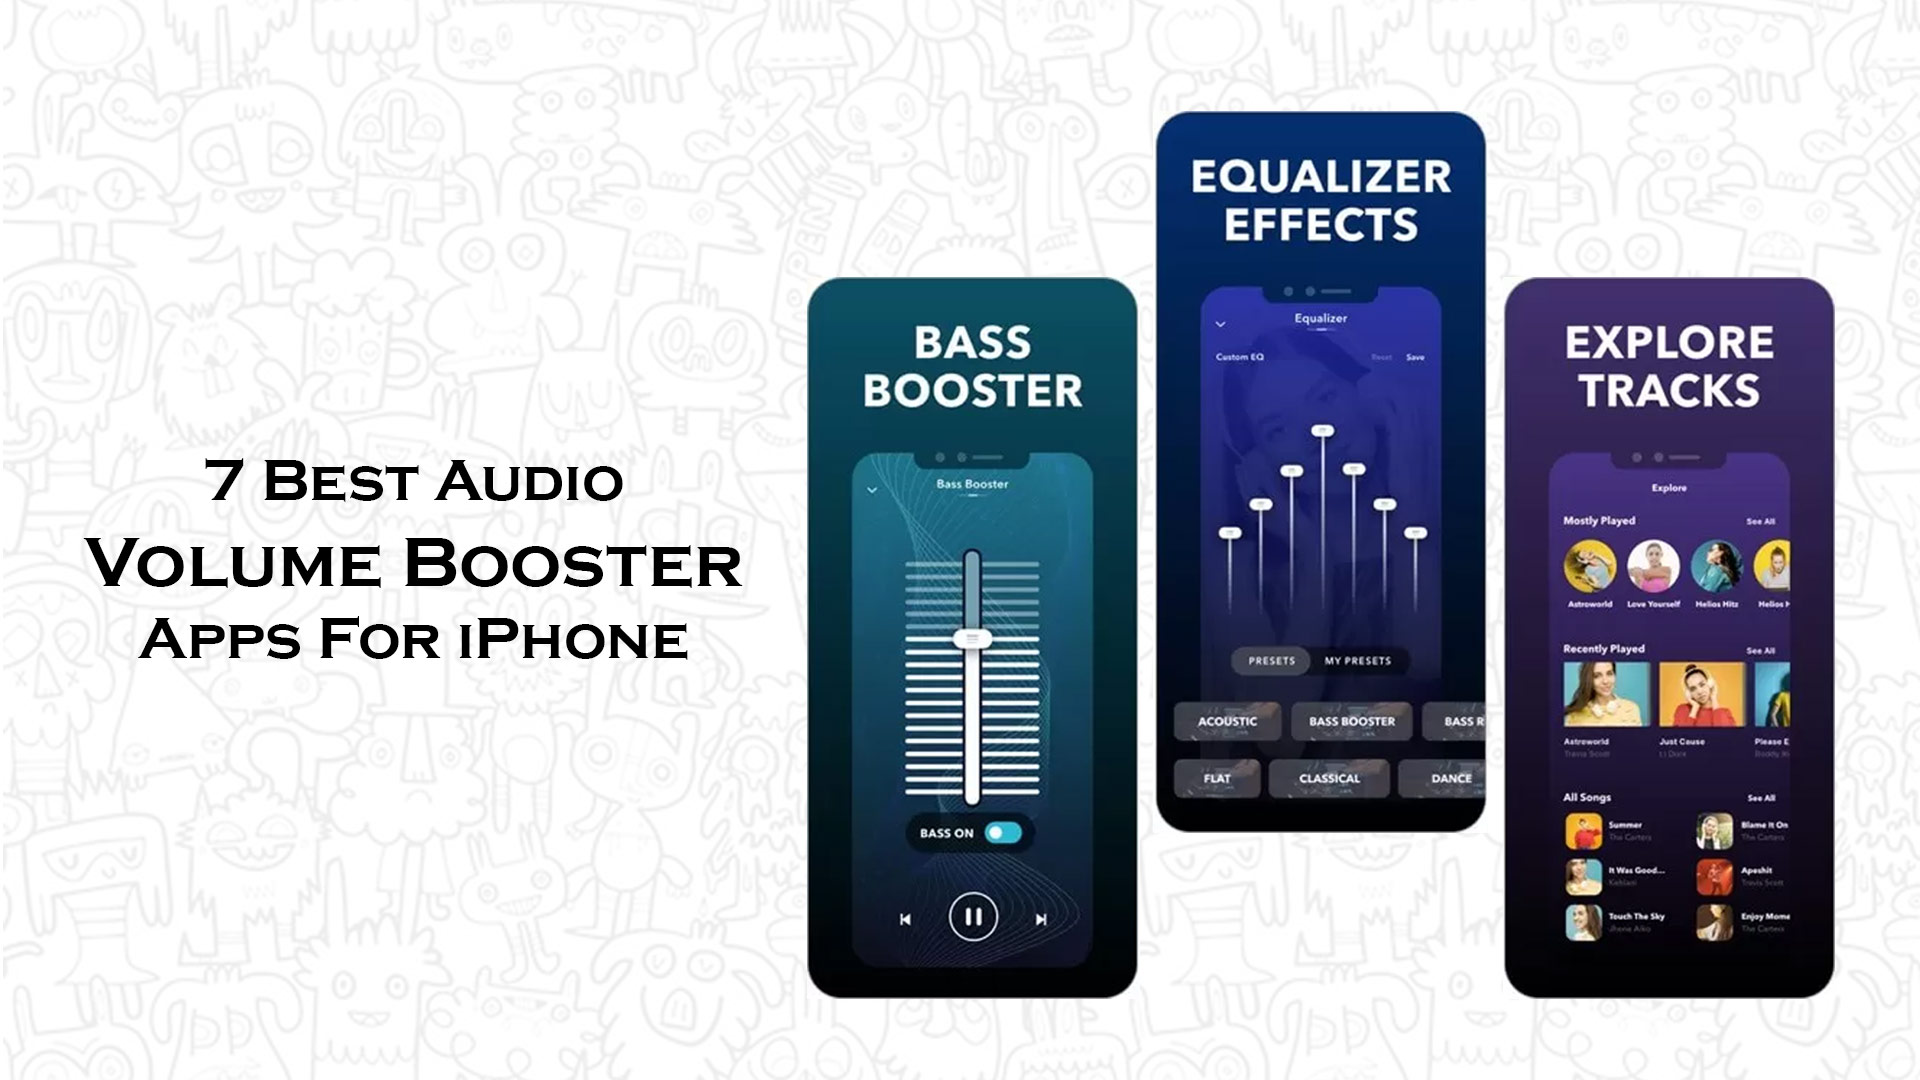 7 Best Audio Volume Booster Apps For iPhone